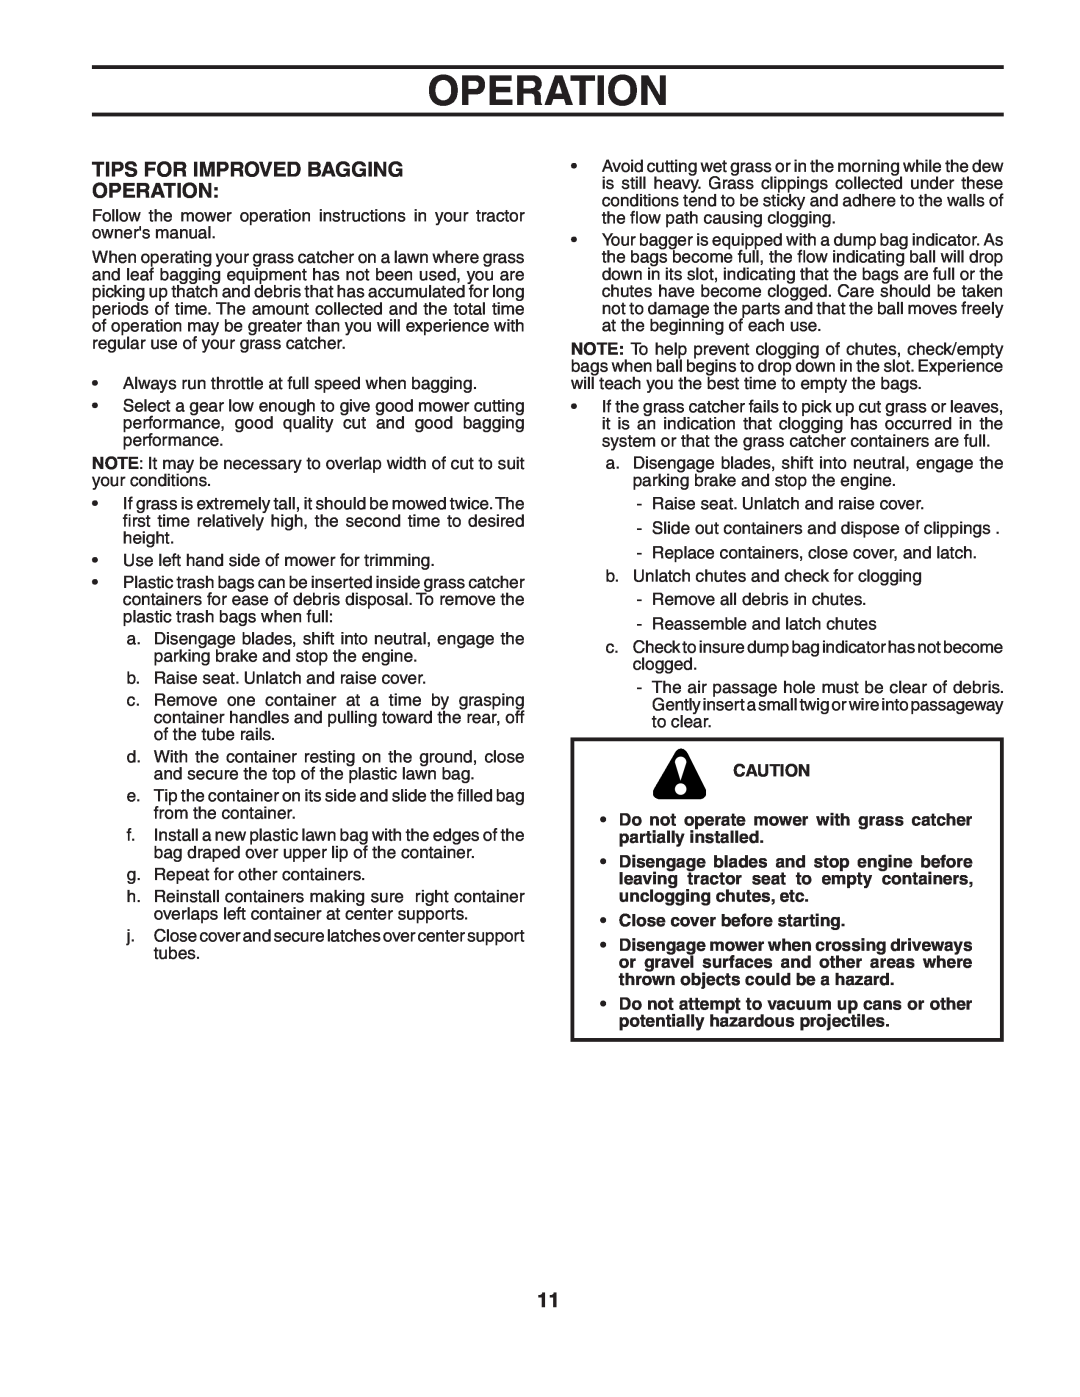 Poulan 954 04 04-01 Tips For Improved Bagging Operation, Do not operate mower with grass catcher partially installed 